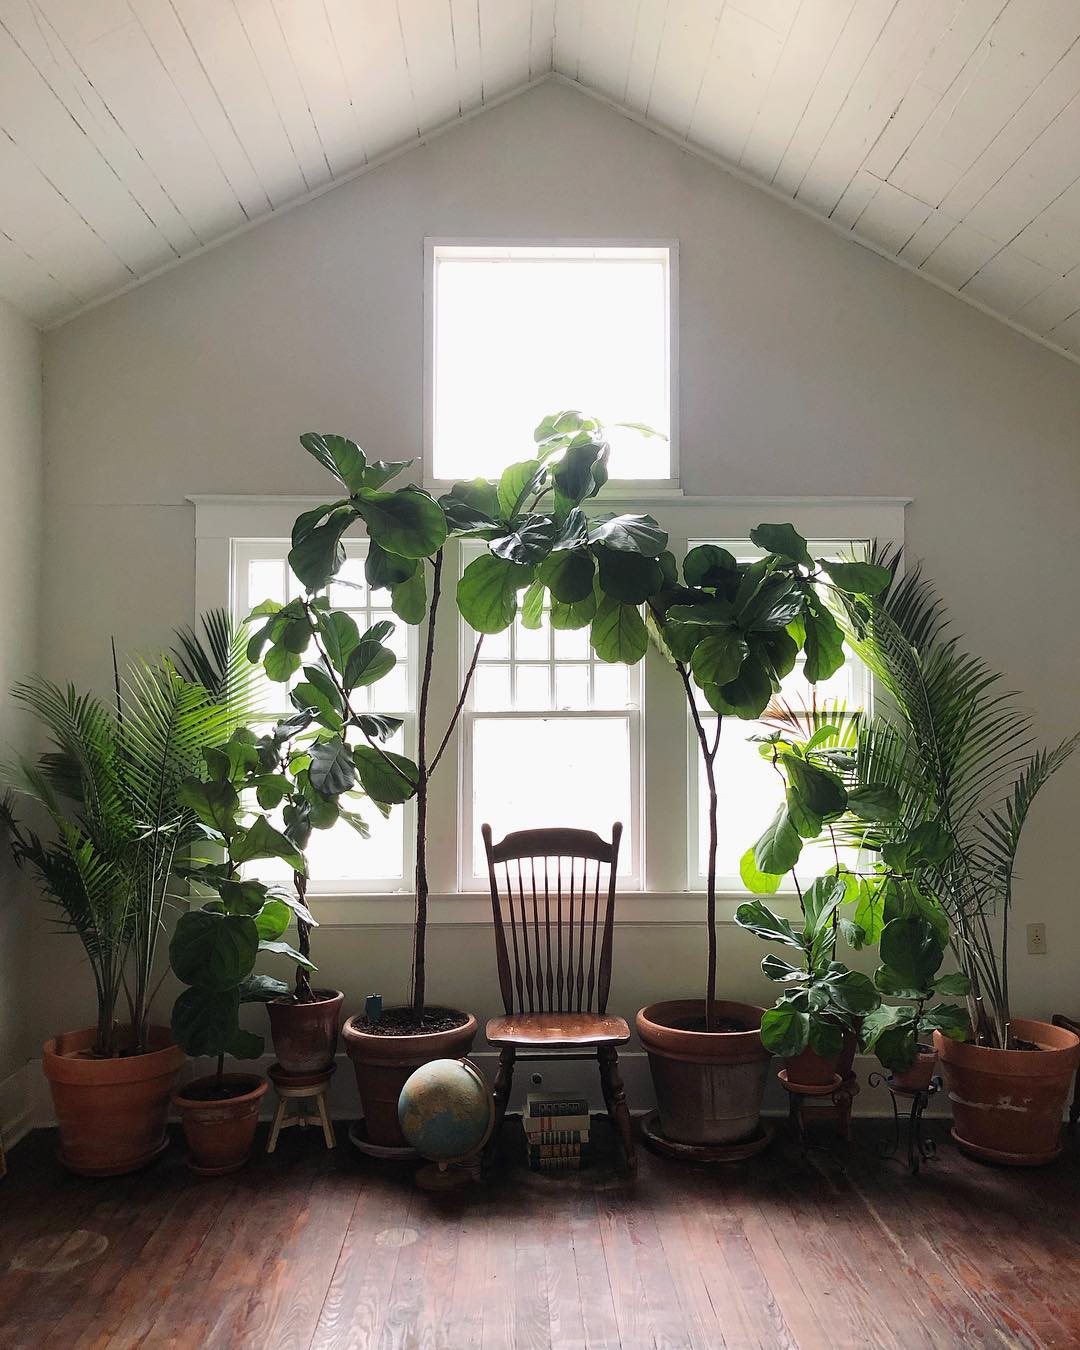 Reading room decorated with different types of large plants that form an arch. In the middle there is a chair